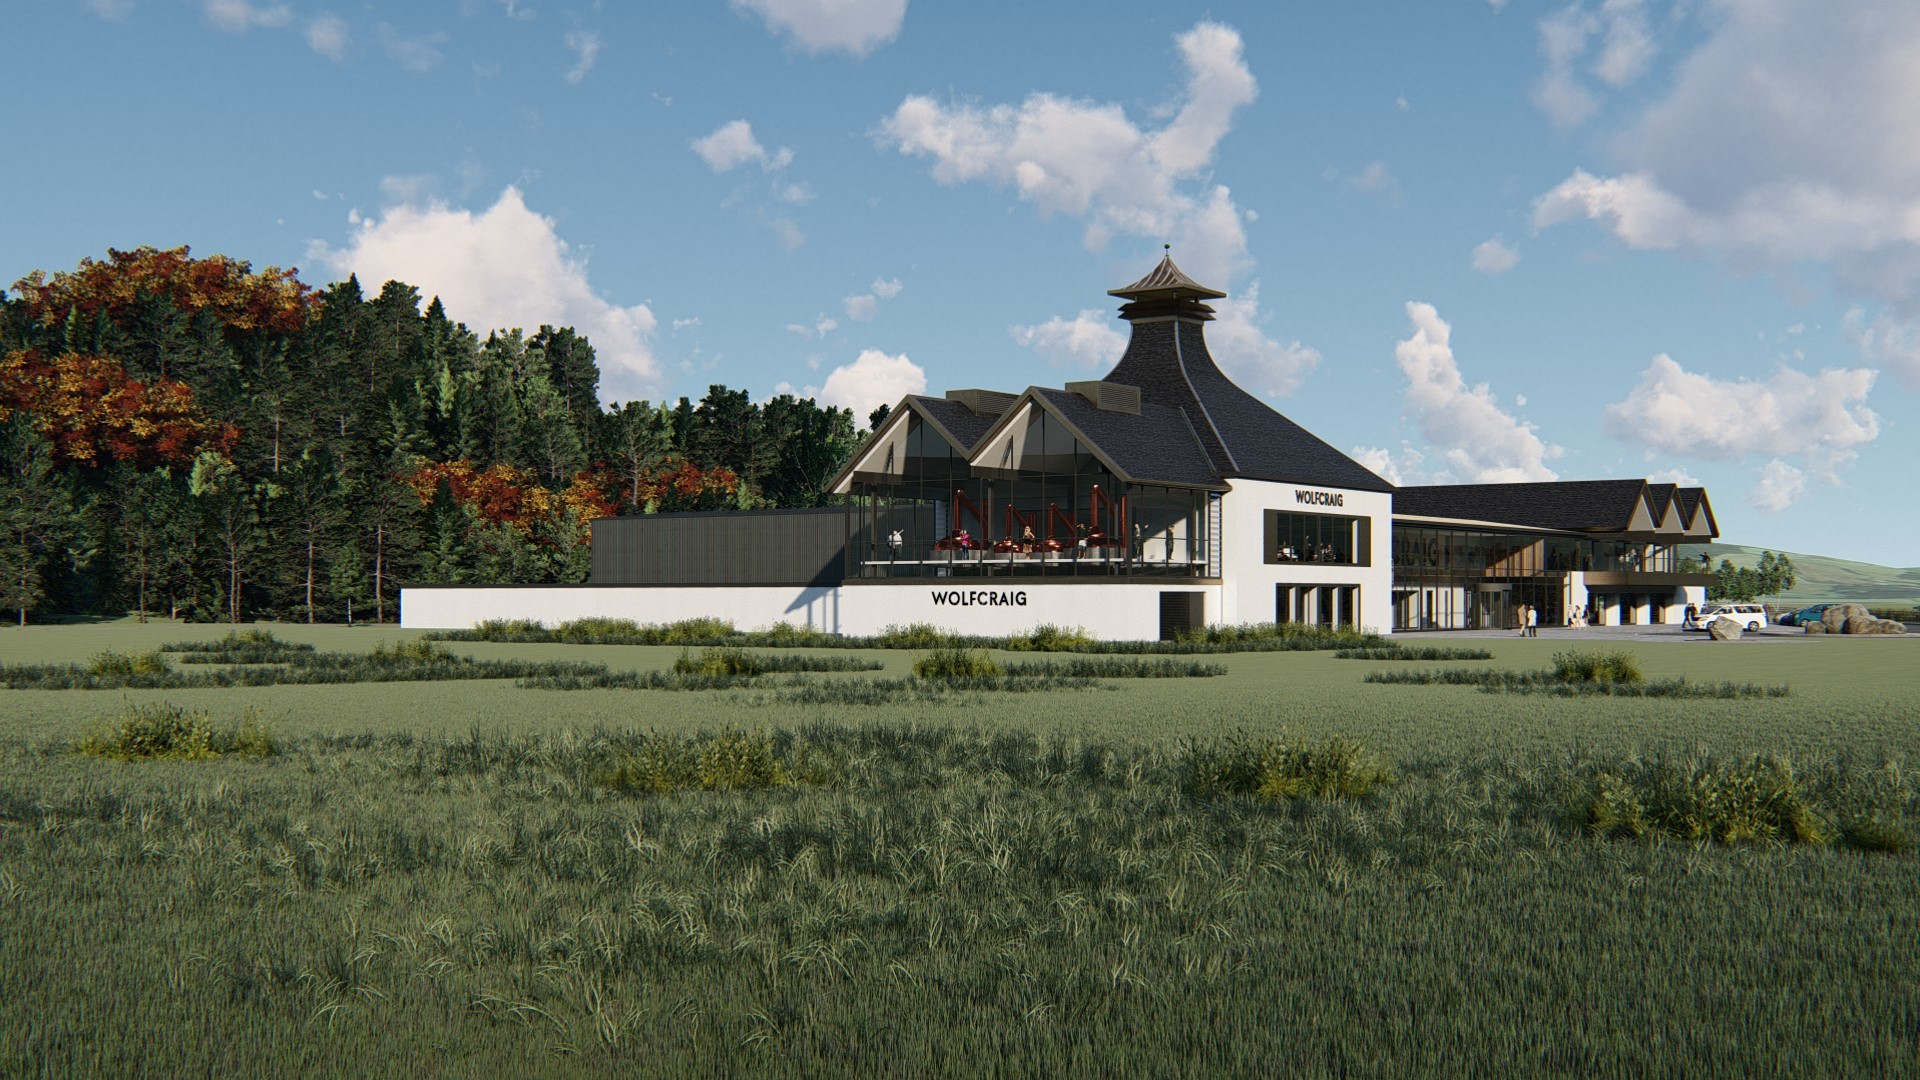 Wolfcraig whisky distillery in high spirits over new Stirling location